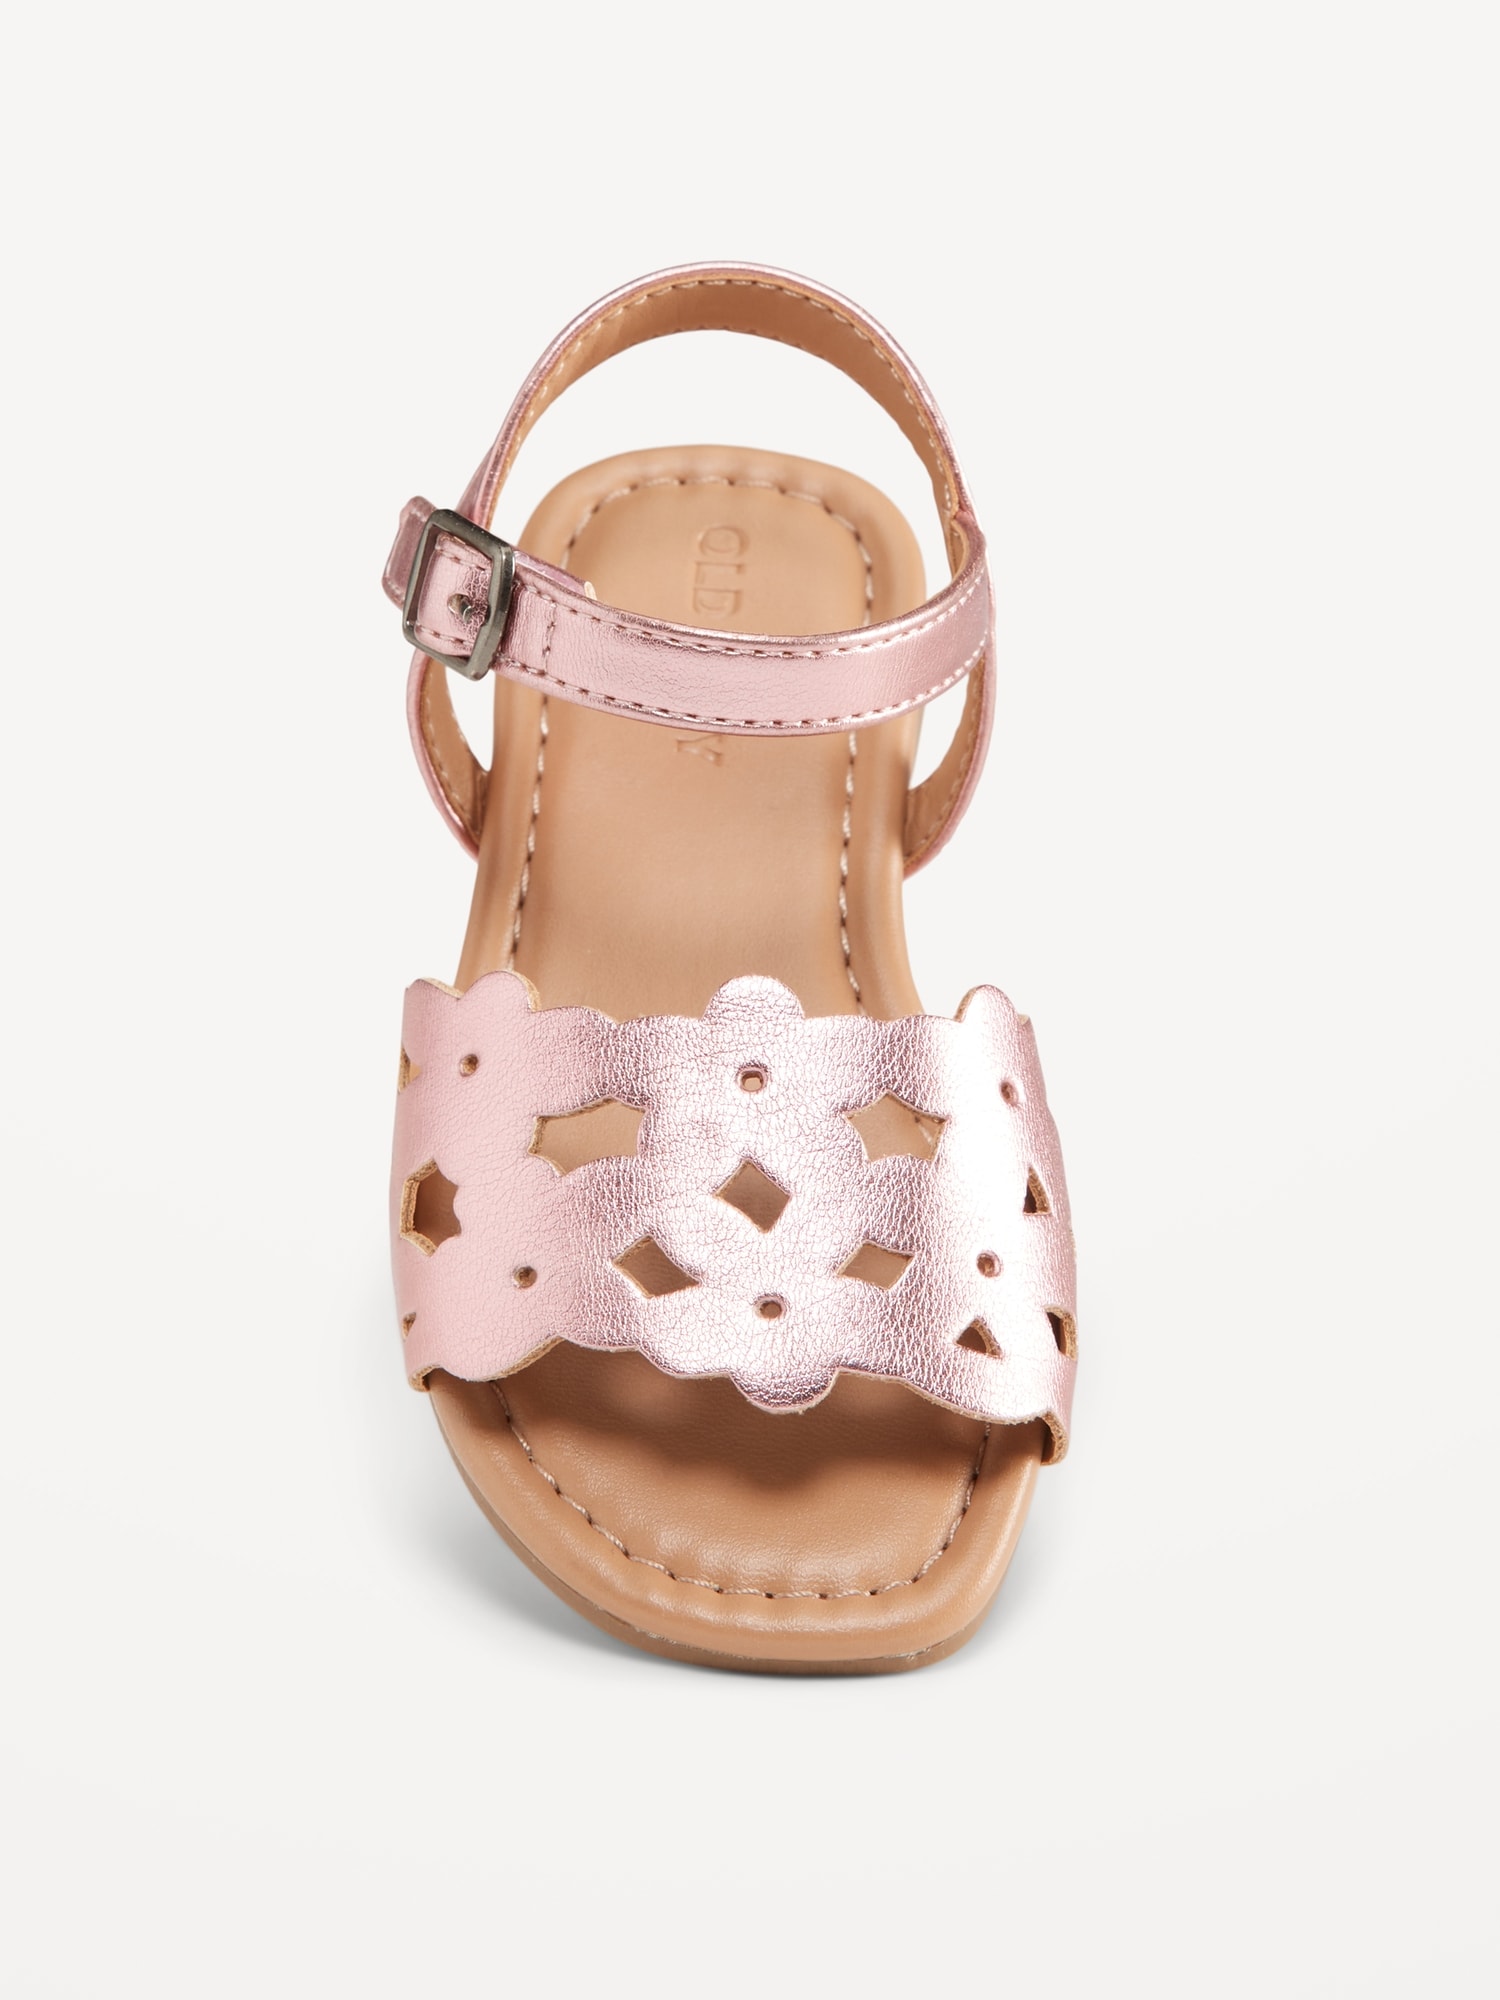 Faux-Leather Cutout Sandals for Toddler Girls